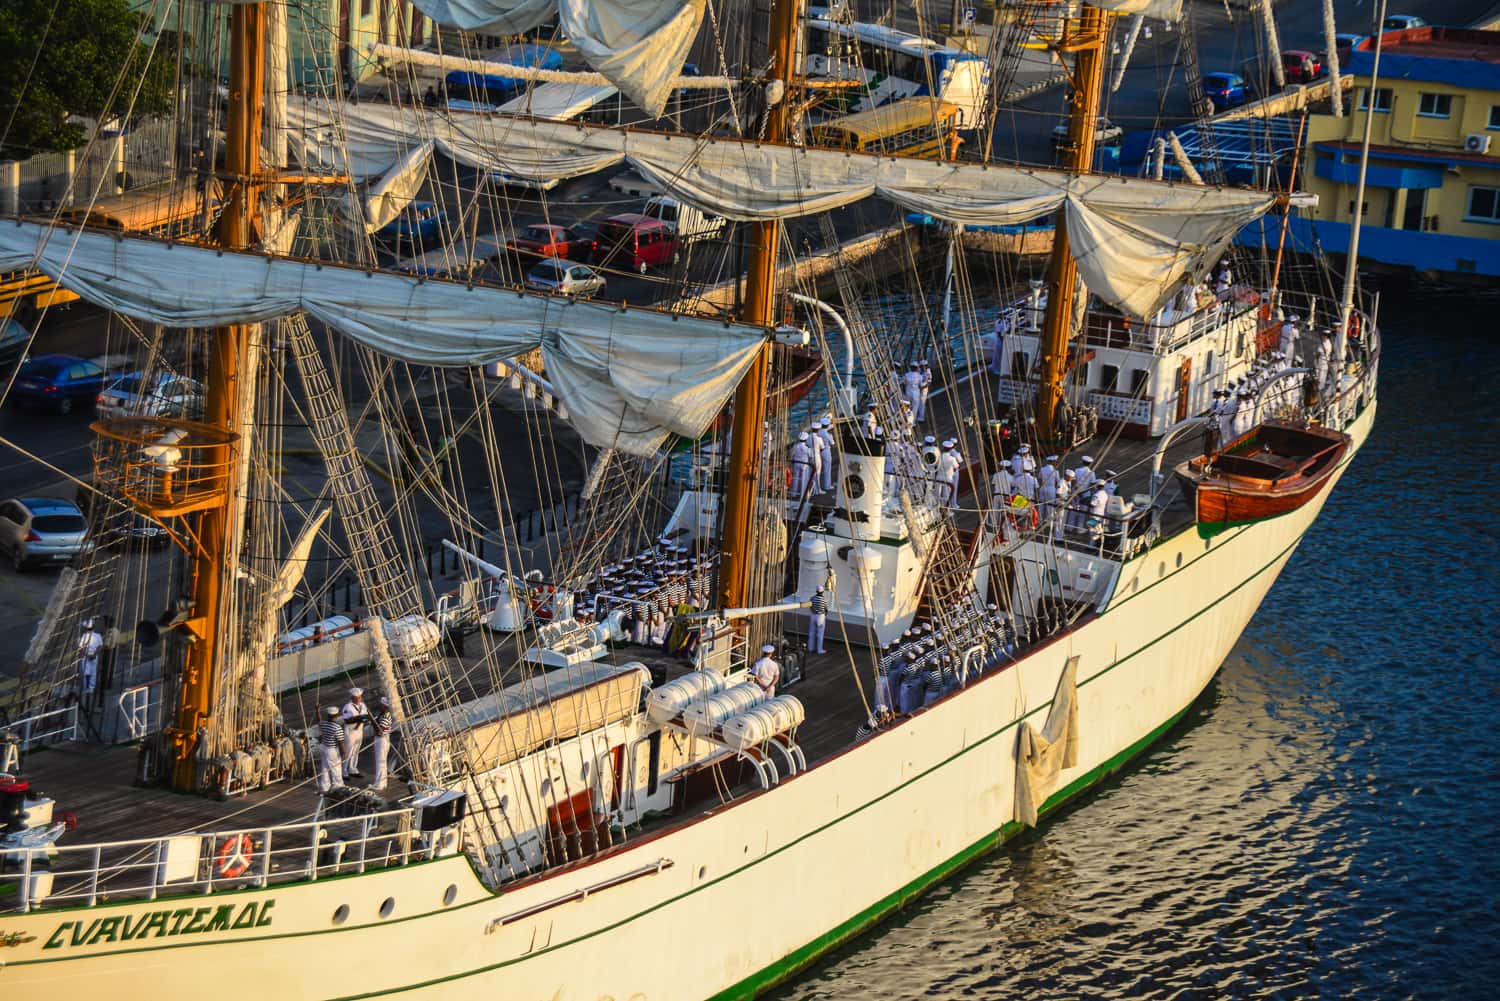 This Mexican tall ship visits for three days each year.